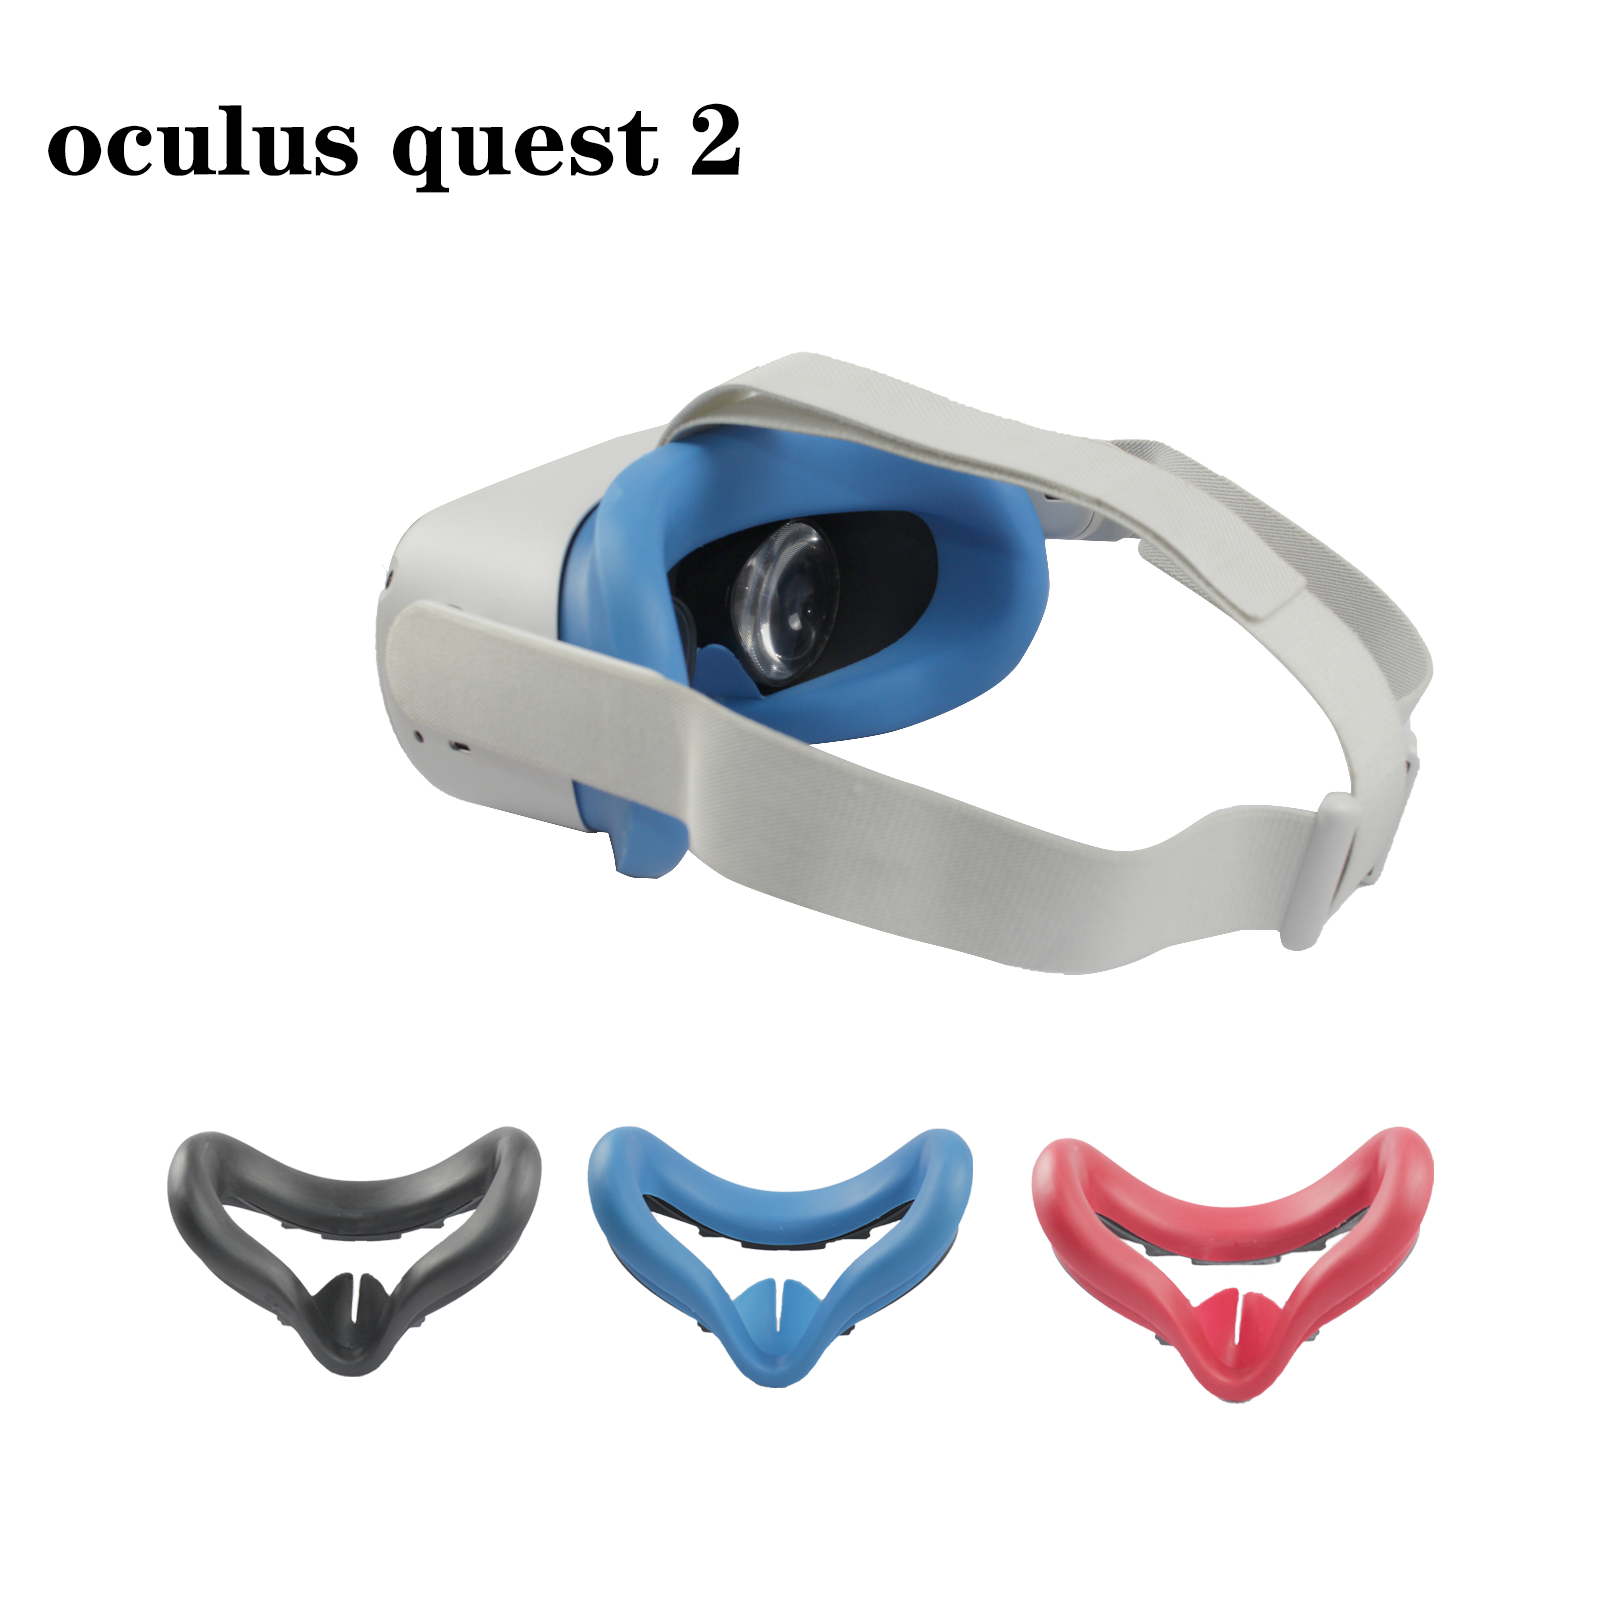 Vr Eye Silicone Front Face Cushion Cover & Thumb Caps For Oculus Quest 2 Headset